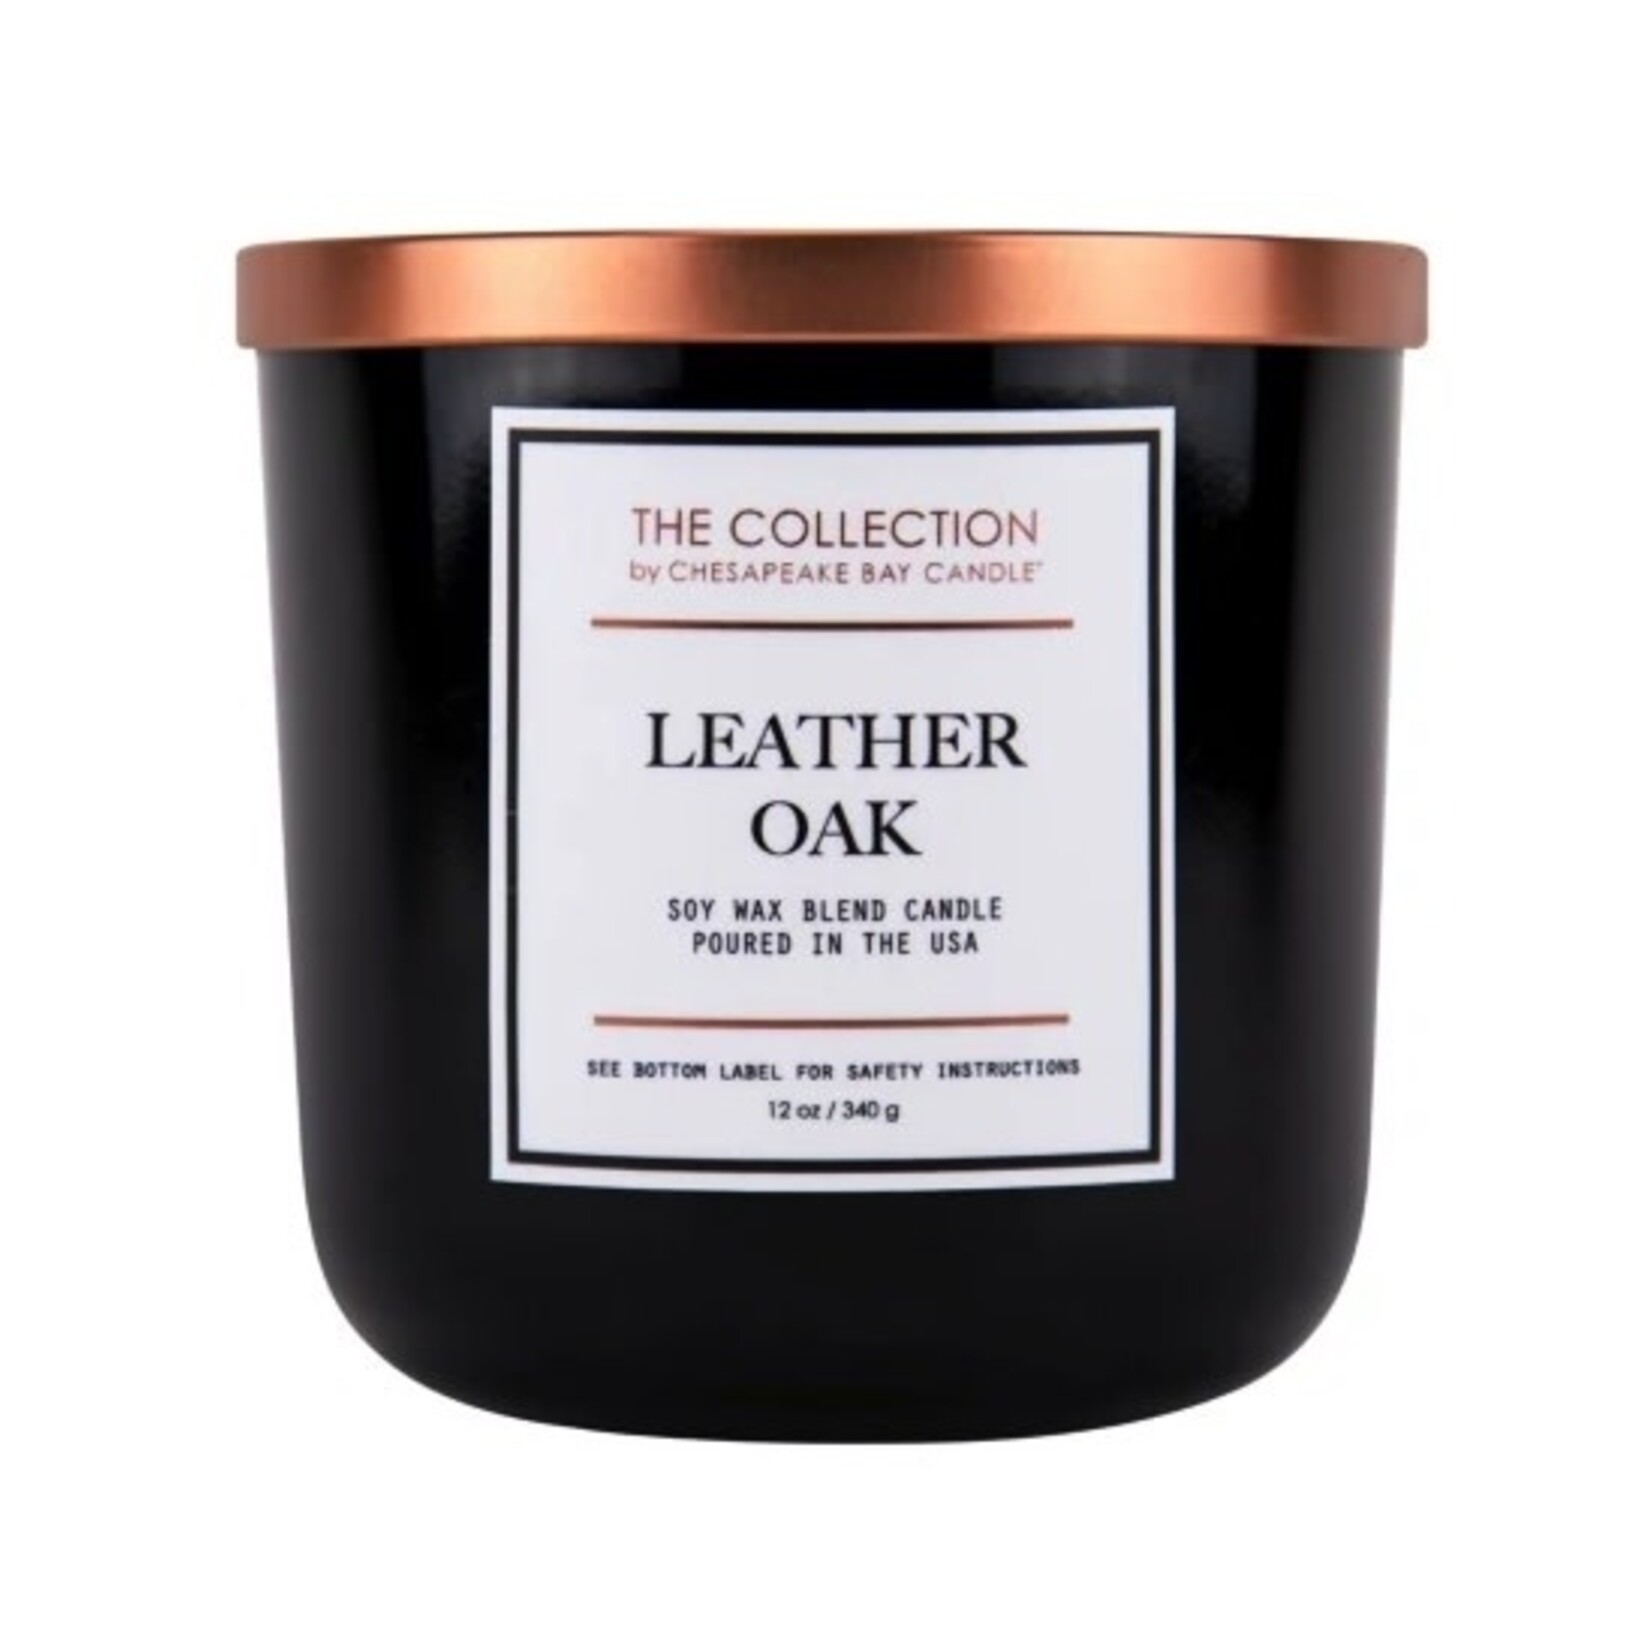 Chesapeake Bay Candle The Collection by Chesapeake Bay Candle Leather Oak